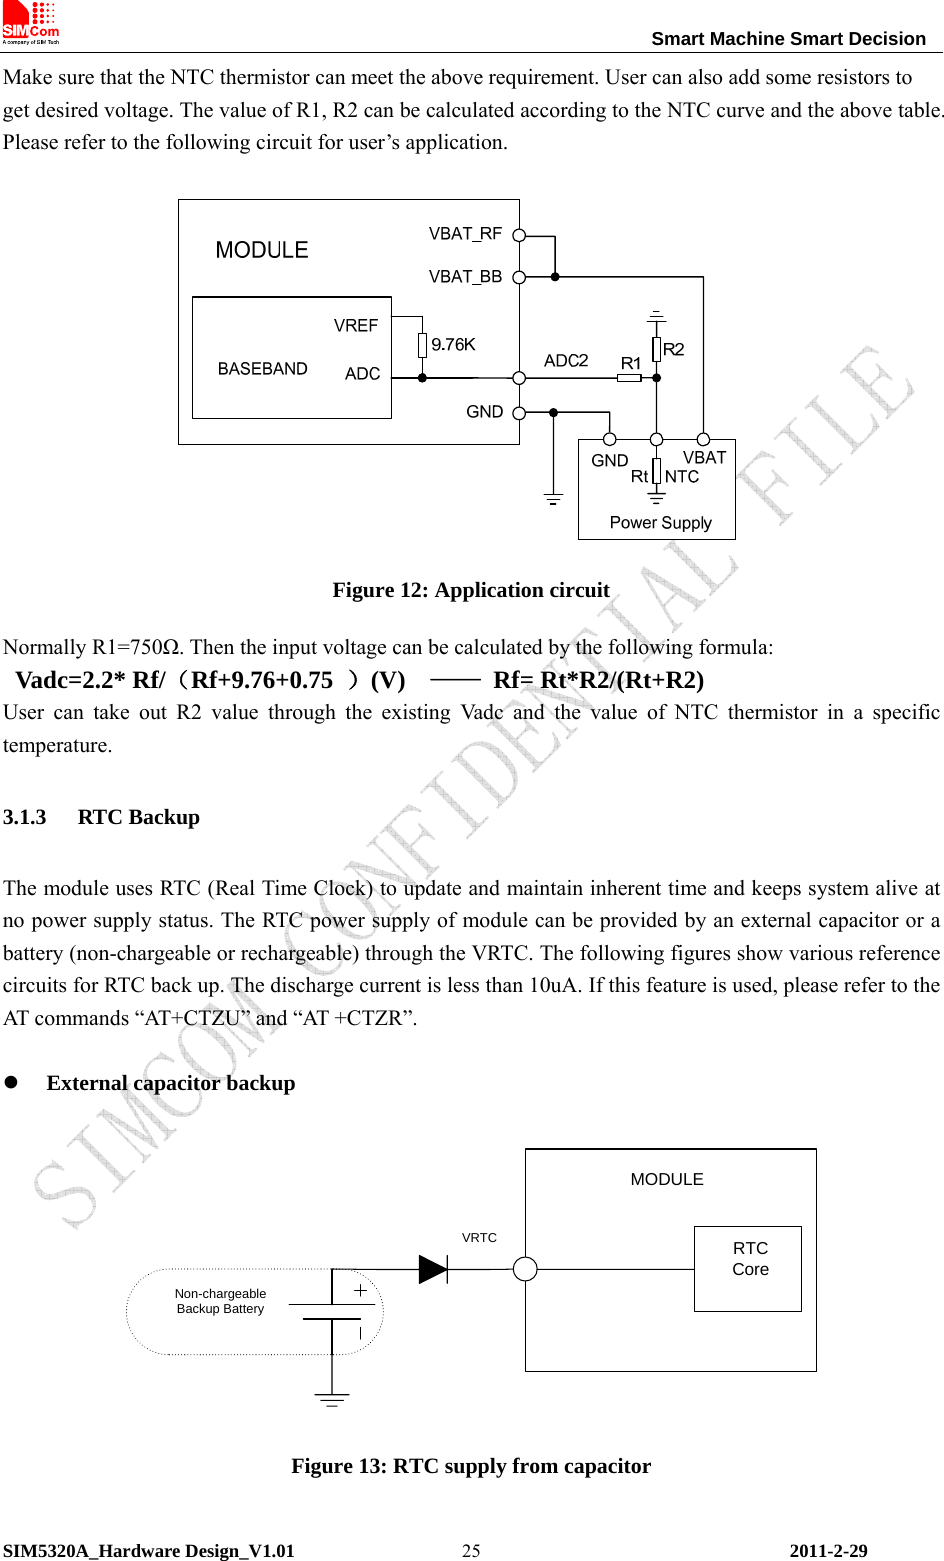                                                                Smart Machine Smart Decision SIM5320A_Hardware Design_V1.01   2011-2-29 25Make sure that the NTC thermistor can meet the above requirement. User can also add some resistors to get desired voltage. The value of R1, R2 can be calculated according to the NTC curve and the above table. Please refer to the following circuit for user’s application.   Figure 12: Application circuit Normally R1=750Ω. Then the input voltage can be calculated by the following formula: Vadc=2.2* Rf/（Rf+9.76+0.75  ）(V)  —— Rf= Rt*R2/(Rt+R2) User can take out R2 value through the existing Vadc and the value of NTC thermistor in a specific temperature. 3.1.3 RTC Backup The module uses RTC (Real Time Clock) to update and maintain inherent time and keeps system alive at no power supply status. The RTC power supply of module can be provided by an external capacitor or a battery (non-chargeable or rechargeable) through the VRTC. The following figures show various reference circuits for RTC back up. The discharge current is less than 10uA. If this feature is used, please refer to the AT commands “AT+CTZU” and “AT +CTZR”.  z External capacitor backup  RTCCoreMODULEVRTCNon-chargeableBackup Battery Figure 13: RTC supply from capacitor 